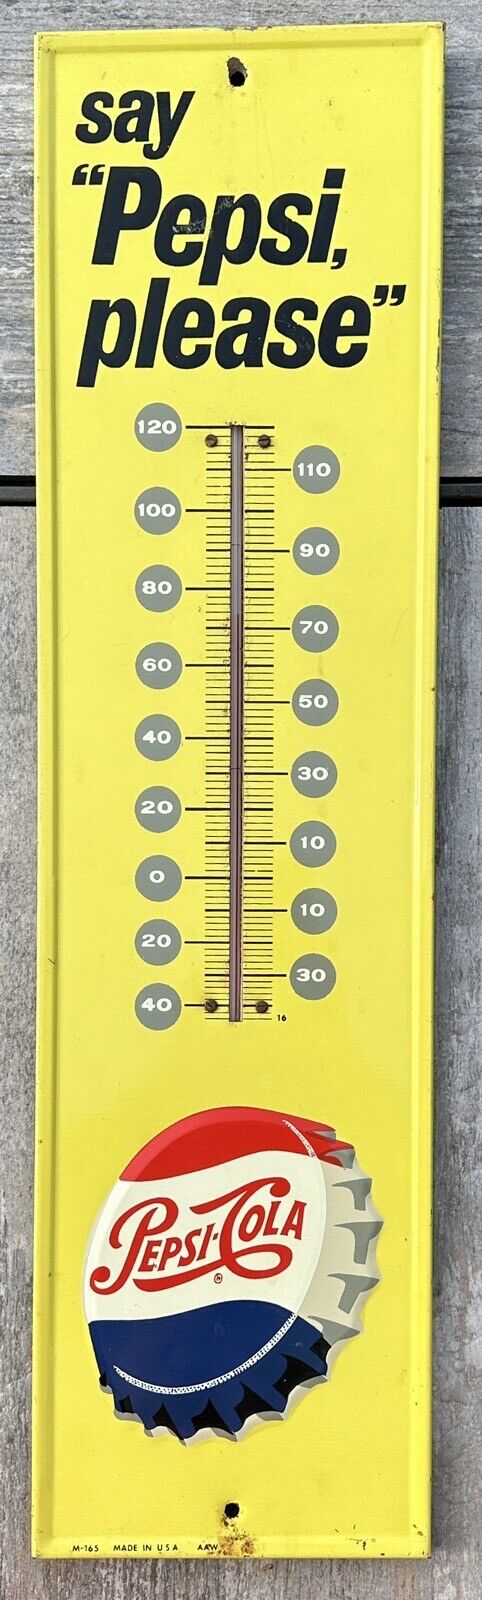 Vintage Say Pepsi Please Wall Thermometer M-165 Raised Bottle Cap Yellow